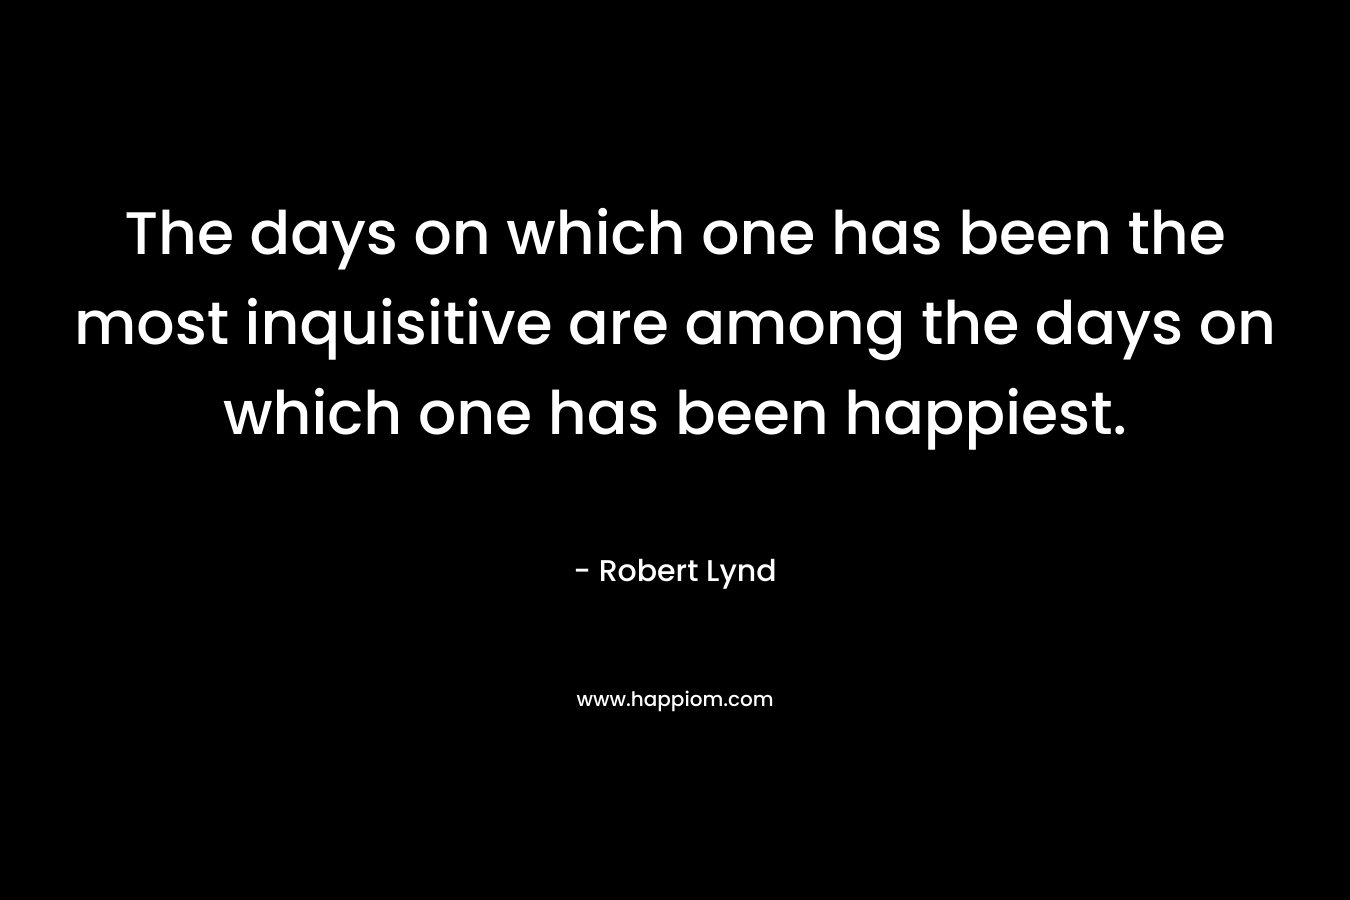 The days on which one has been the most inquisitive are among the days on which one has been happiest.